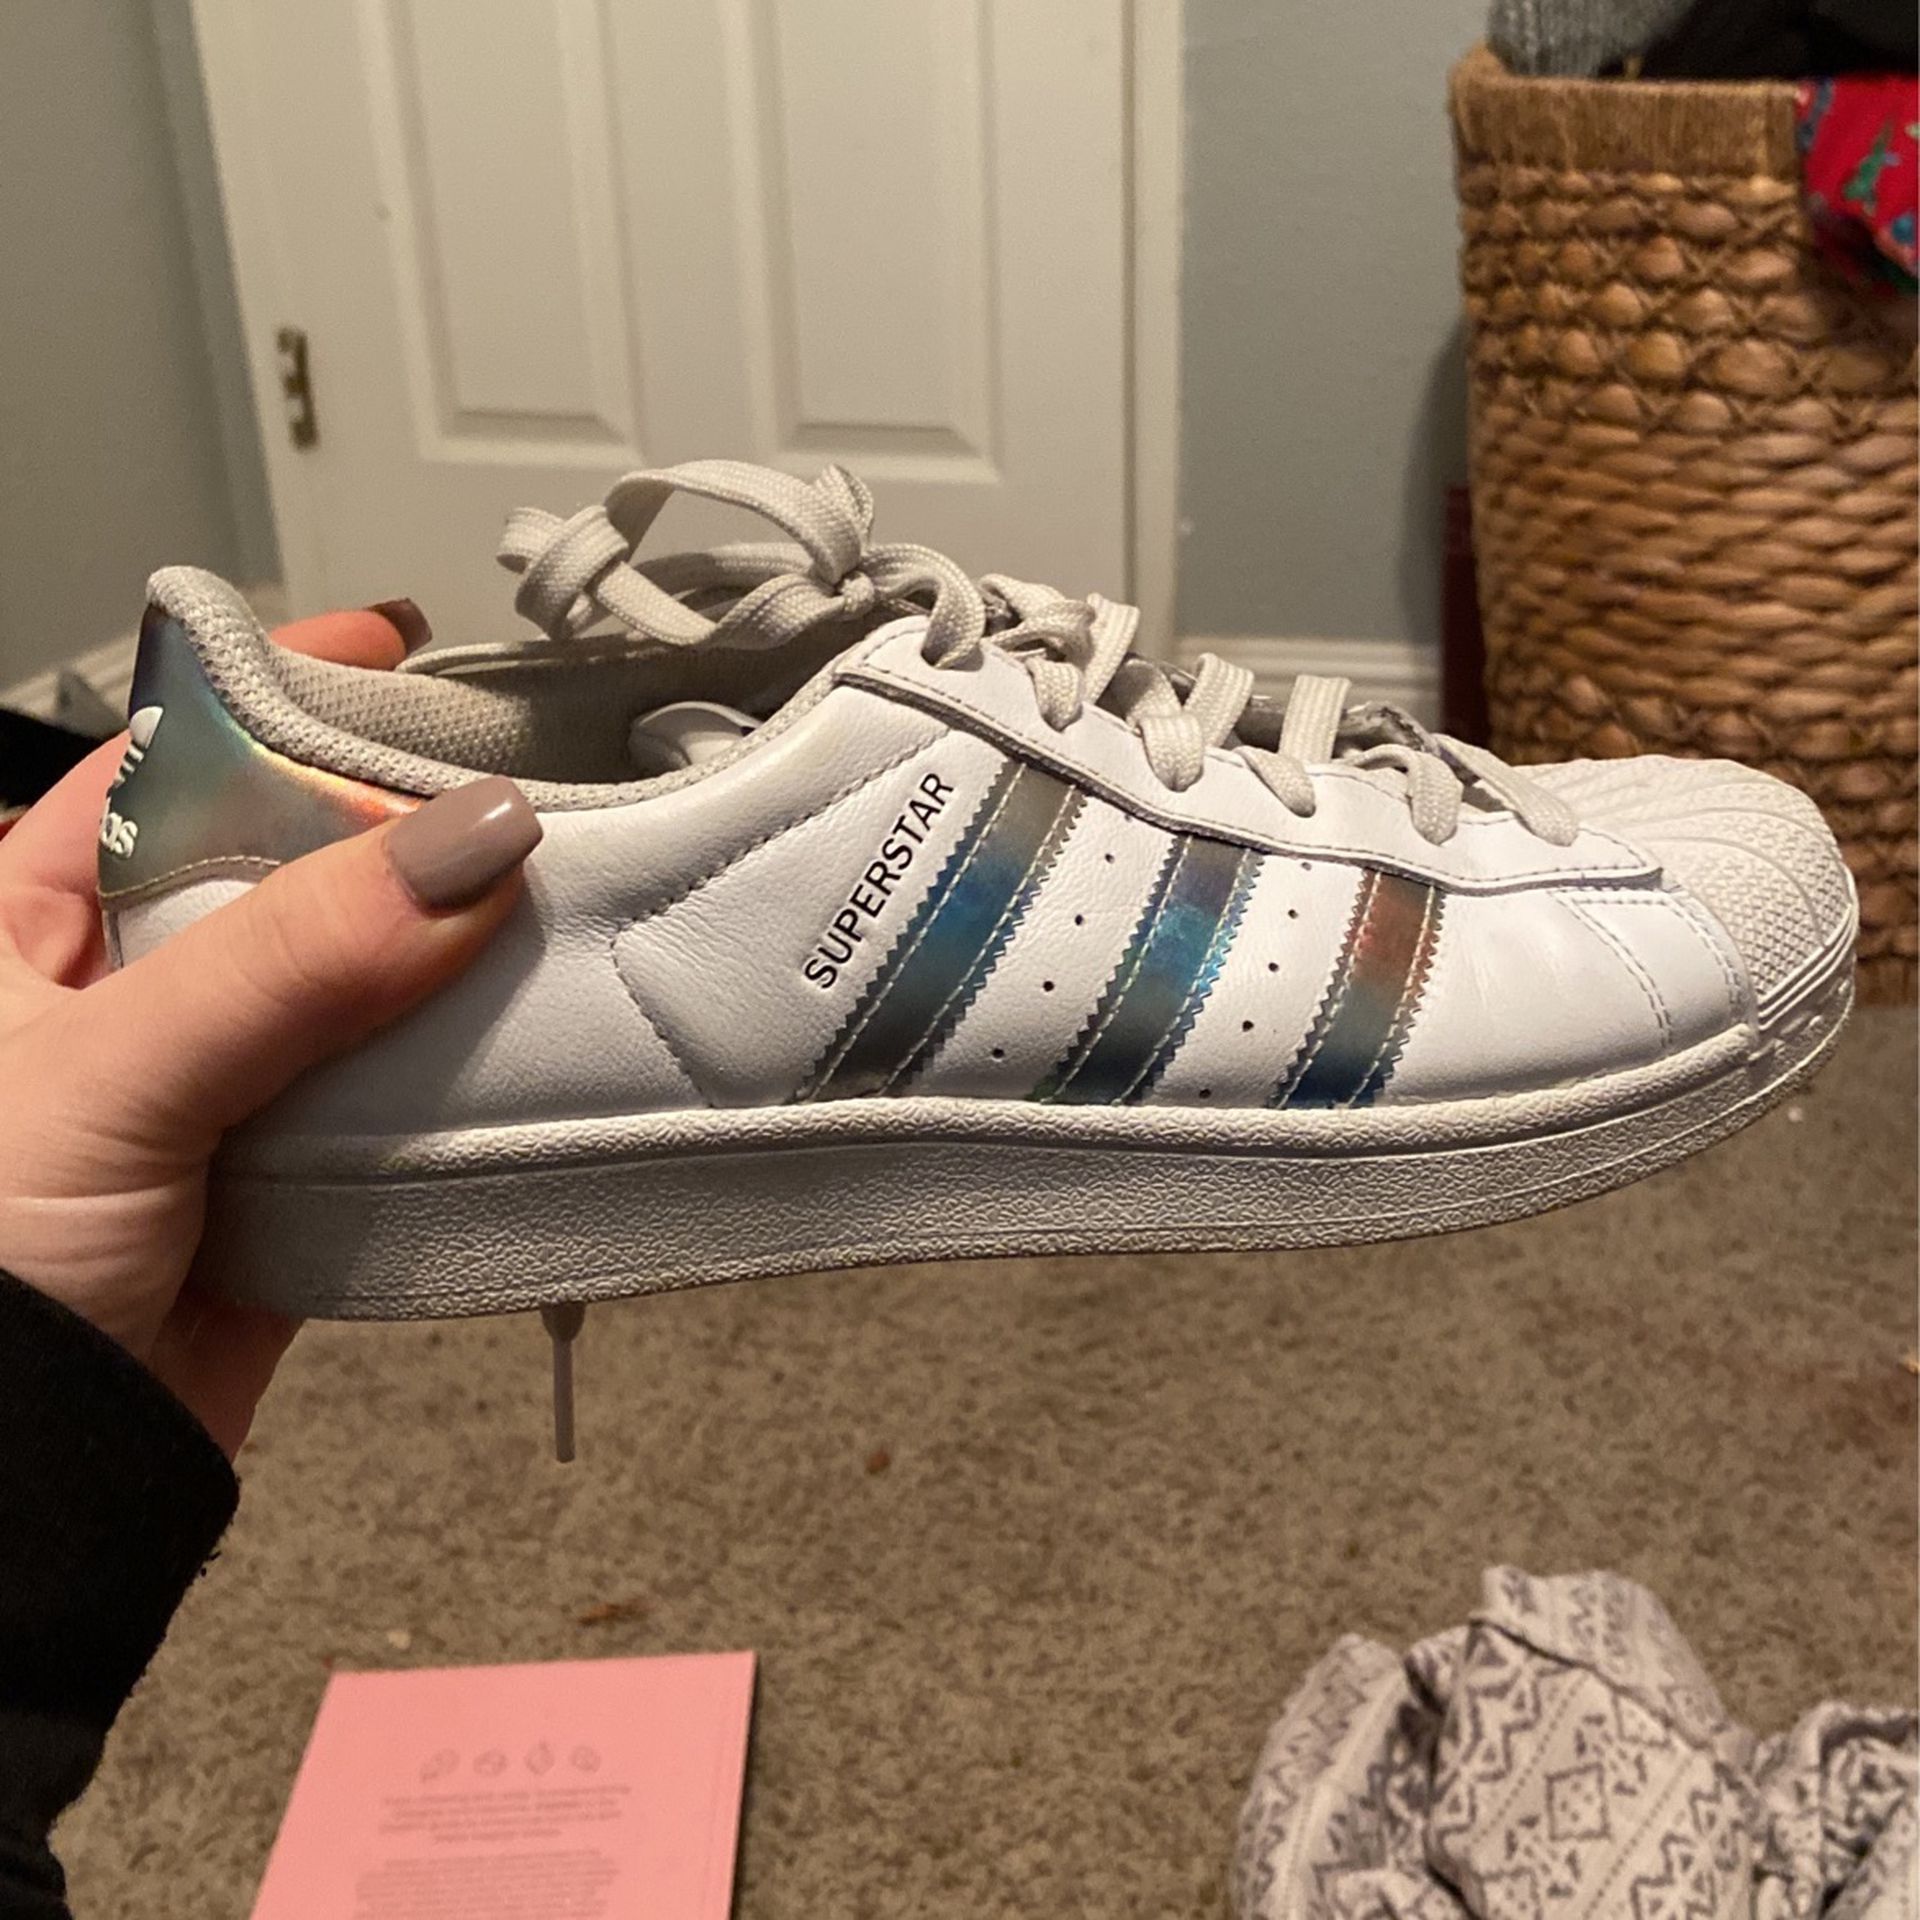 Adidas Holographic Tennis Shoes Shell Toe Women's Size for Sale in Modesto, CA - OfferUp